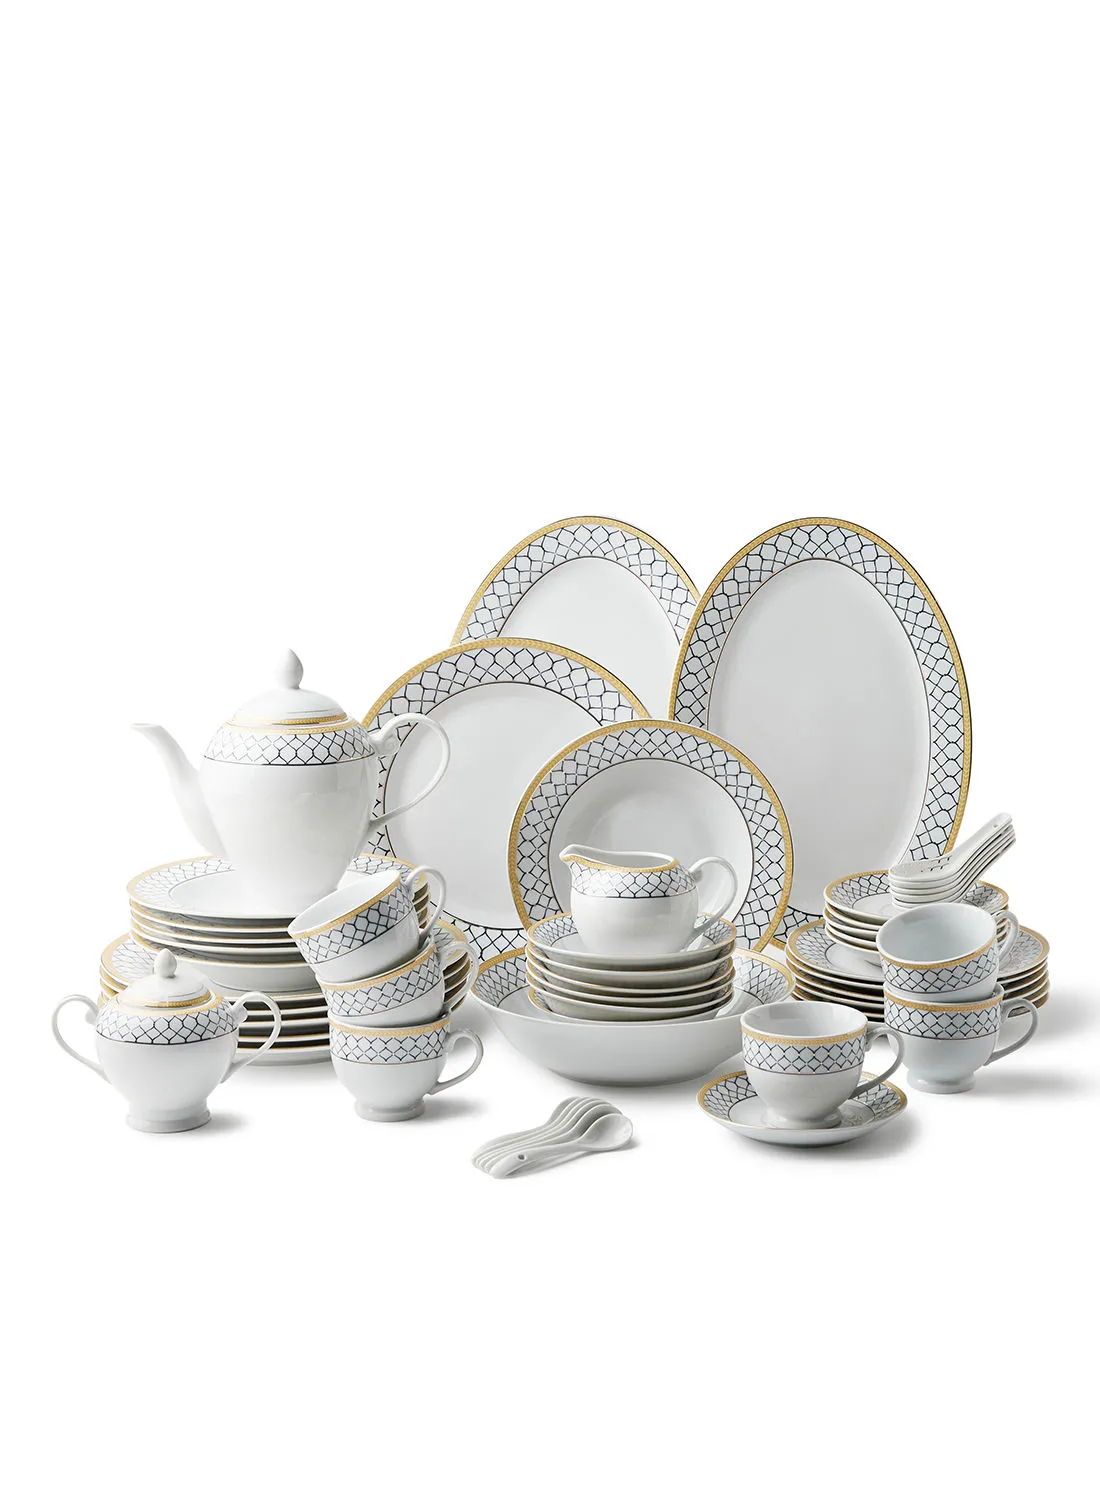 noon east 56 Piece Porcelain Dinner Set - Dishes, Plates - Dinner Plate, Side Plate, Bowl, Cups, Serving Dish And Bowl - Serves 6 - Festive Design White/Gold Web